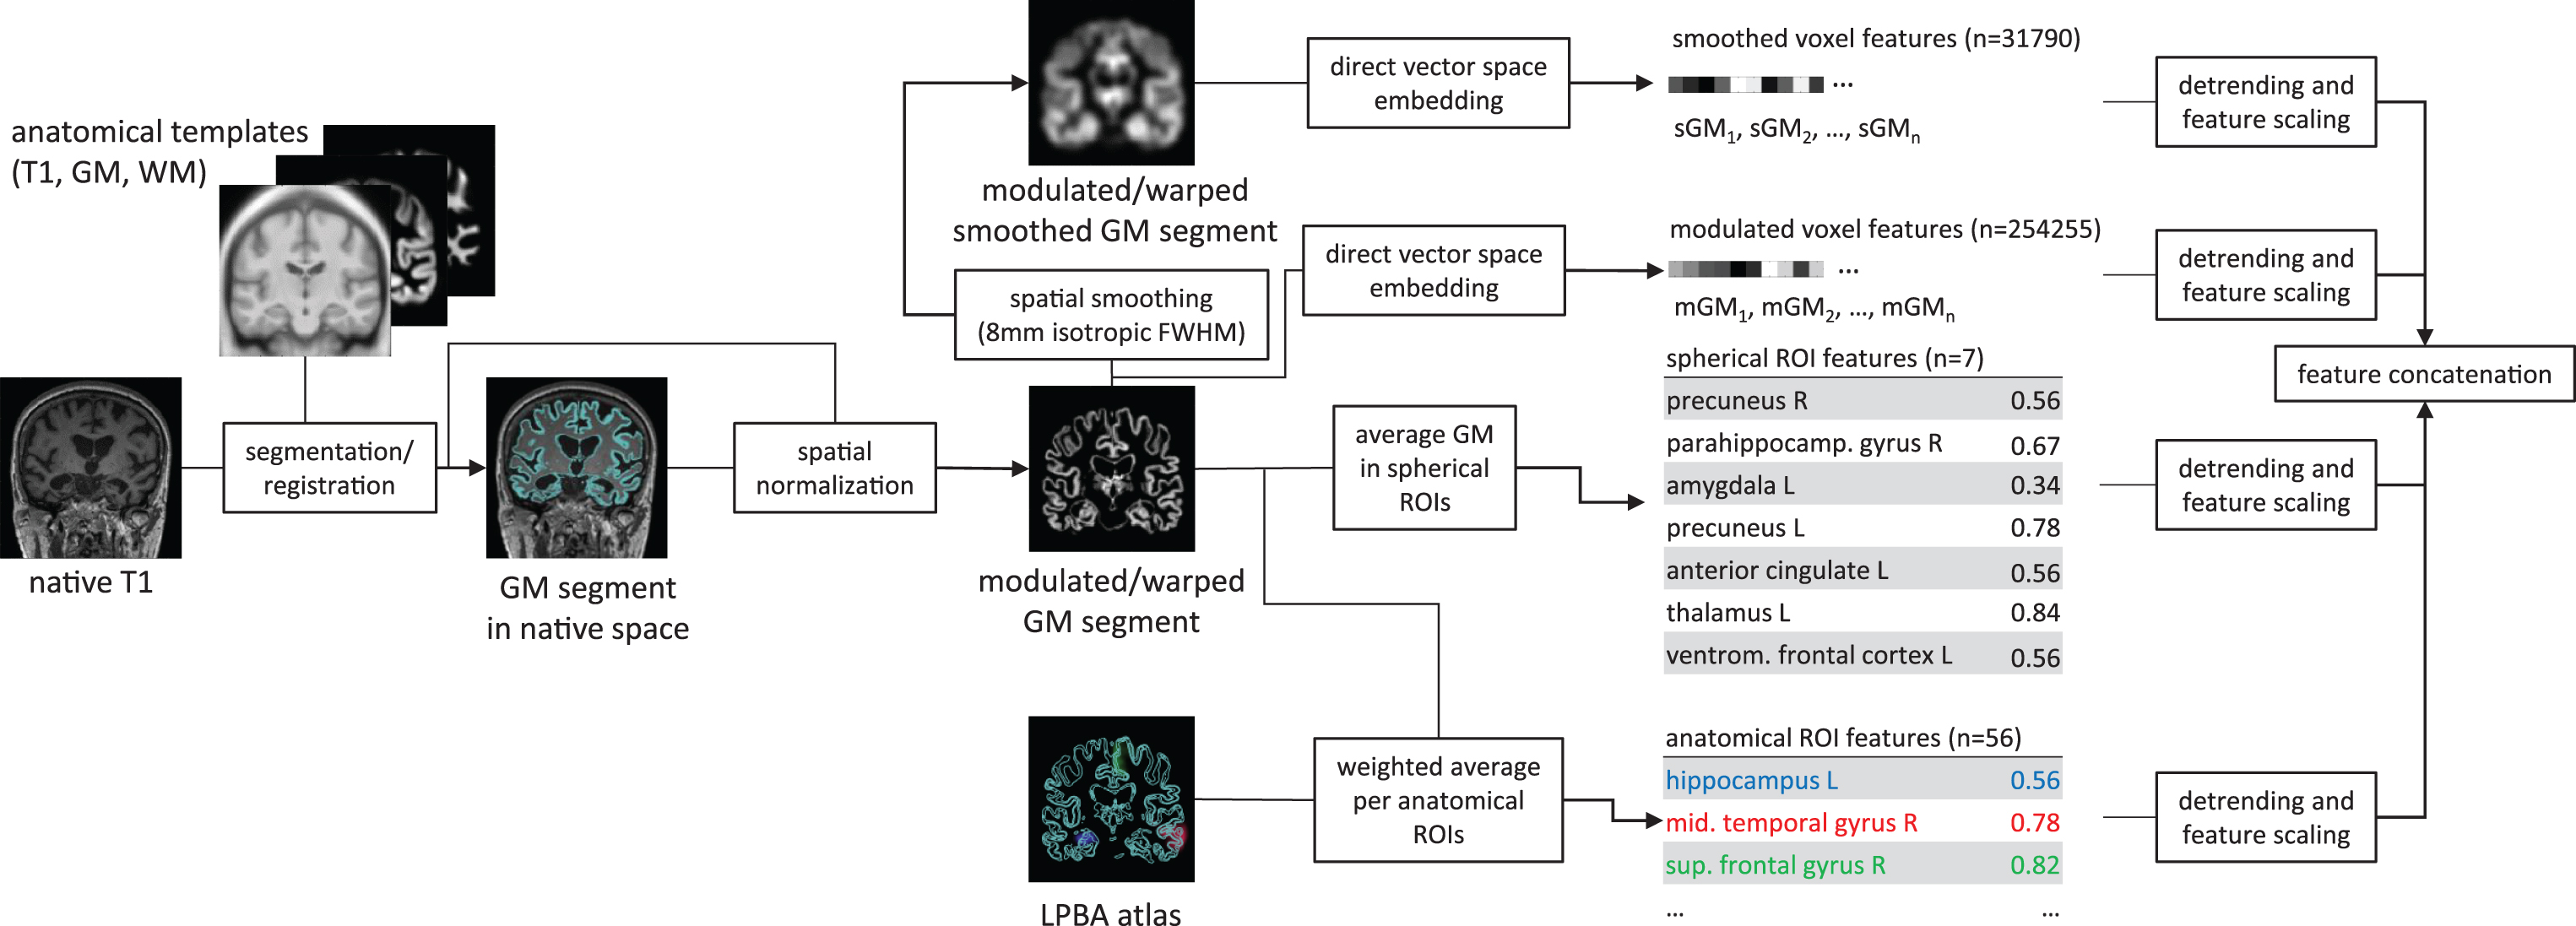 Data pre-processing for extraction of the raw features for each individual T1 weighted image. The pipeline extracts four different features sets from the native T1 image, including smoothed and unsmoothed voxel-wise local grey matter (GM) volumes, average GM volumes of seven ROIs identified in an independent meta-analysis [8], as well as weighted averages of local GM volumes weighted by the LONI probabilistic brain atlas (LPBA) [47]. The estimation of local grey matter was computed using the VBM8 toolbox (http://www.neuro.uni-jena.de/vbm/) with default parameters and modulation by the Jacobian determinant of the local non-linear deformation field. The number of features per feature set varies between 7 (spherical ROI features) and 254255 (unsmoothed voxel features).